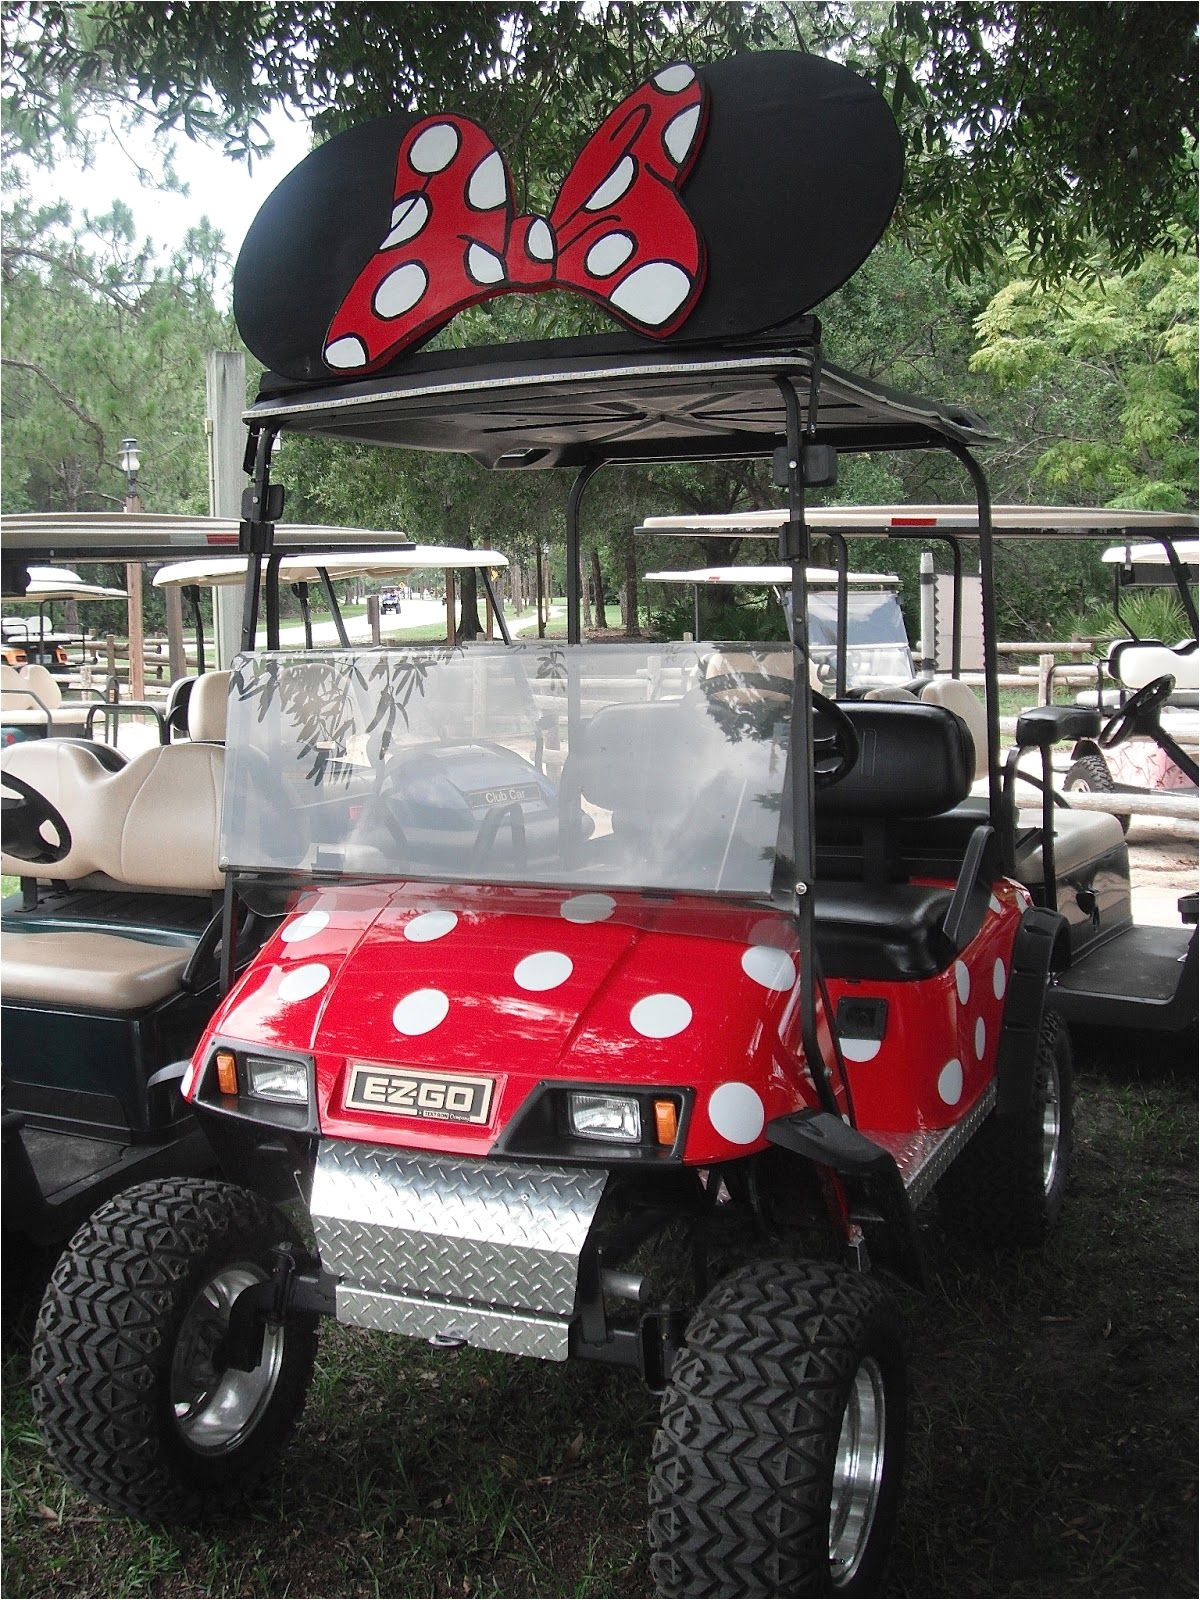 private decorated cart fort wilderness campground so cute and clever i want one